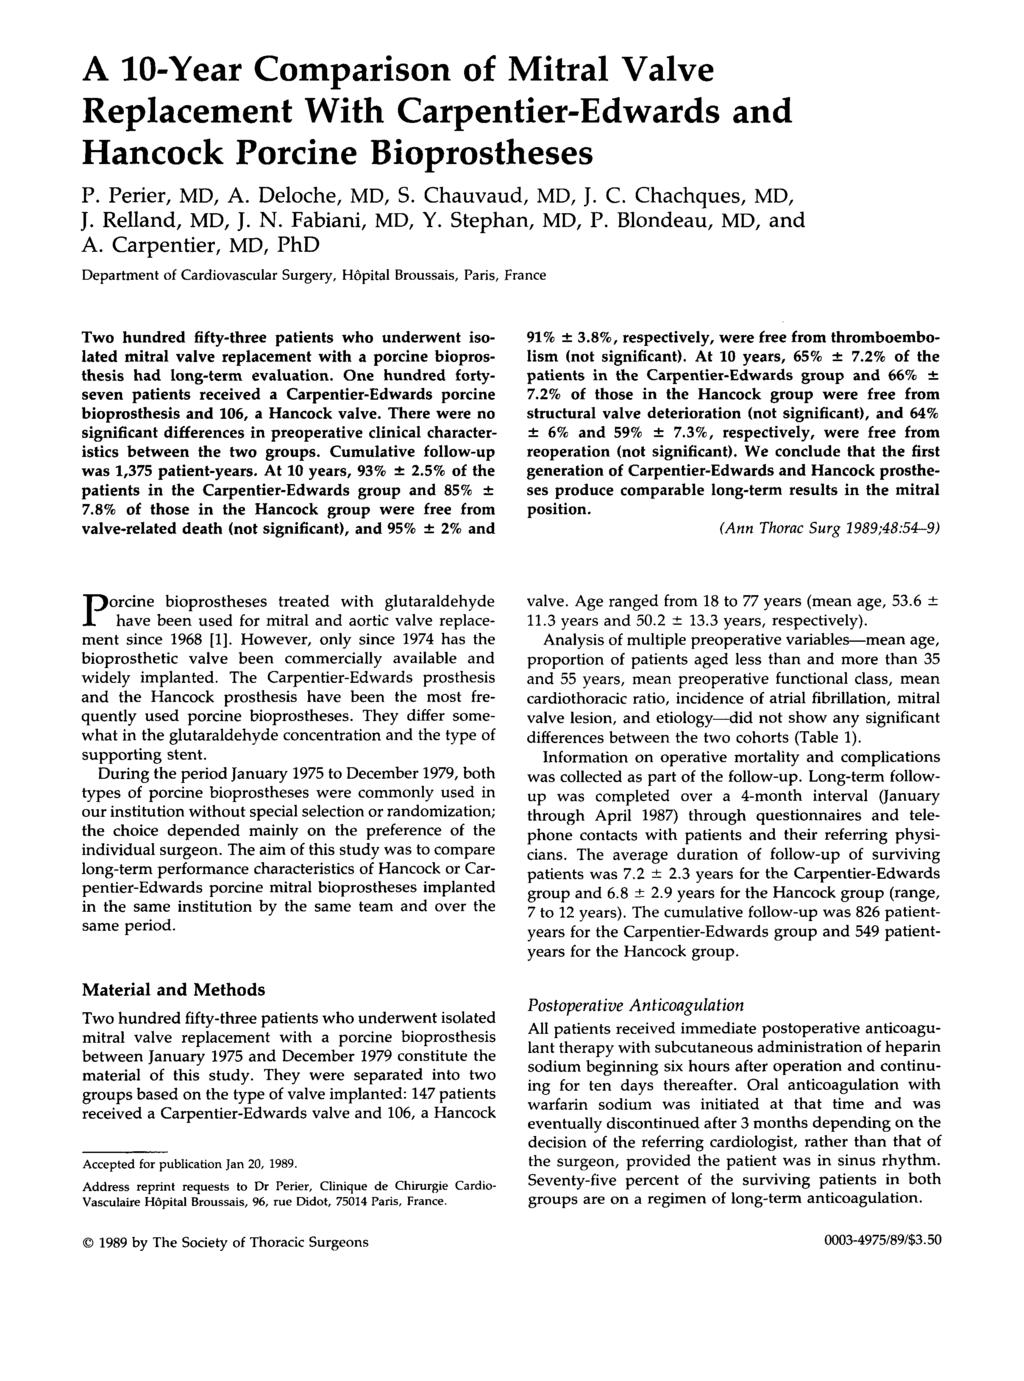 A -Year Comparison of Mitral Valve Replacement With Carpentier-Edwards and Hancock Porcine Bioprostheses P. Perier, MD, A. Deloche, MD, S. Chauvaud, MD, J. C. Chachques, MD, J. Relland, MD, J. N.